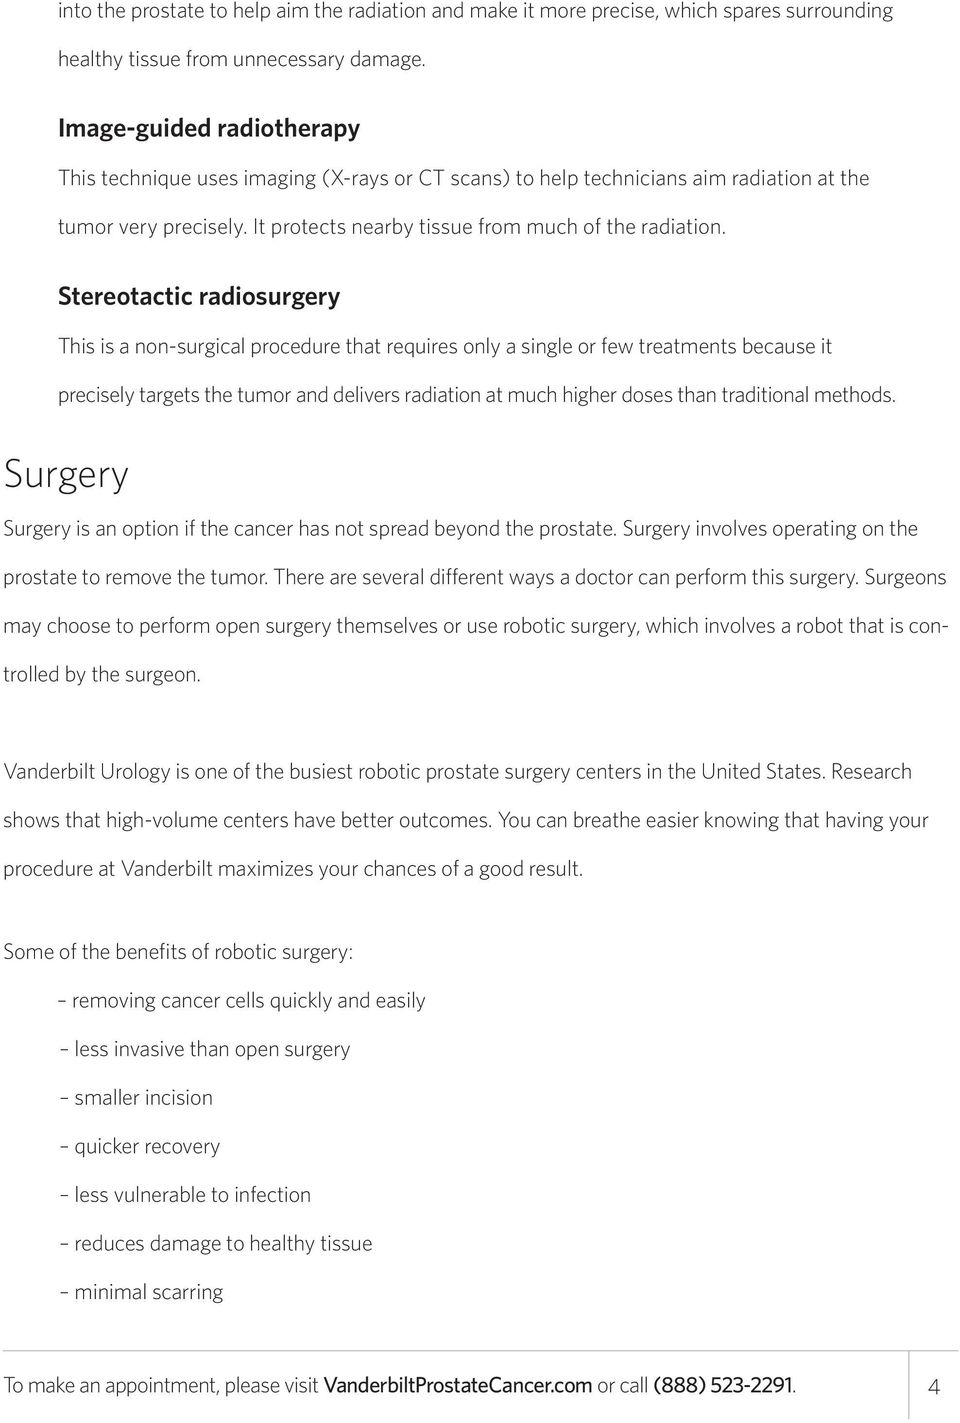 Stereotactic radiosurgery This is a non-surgical procedure that requires only a single or few treatments because it precisely targets the tumor and delivers radiation at much higher doses than